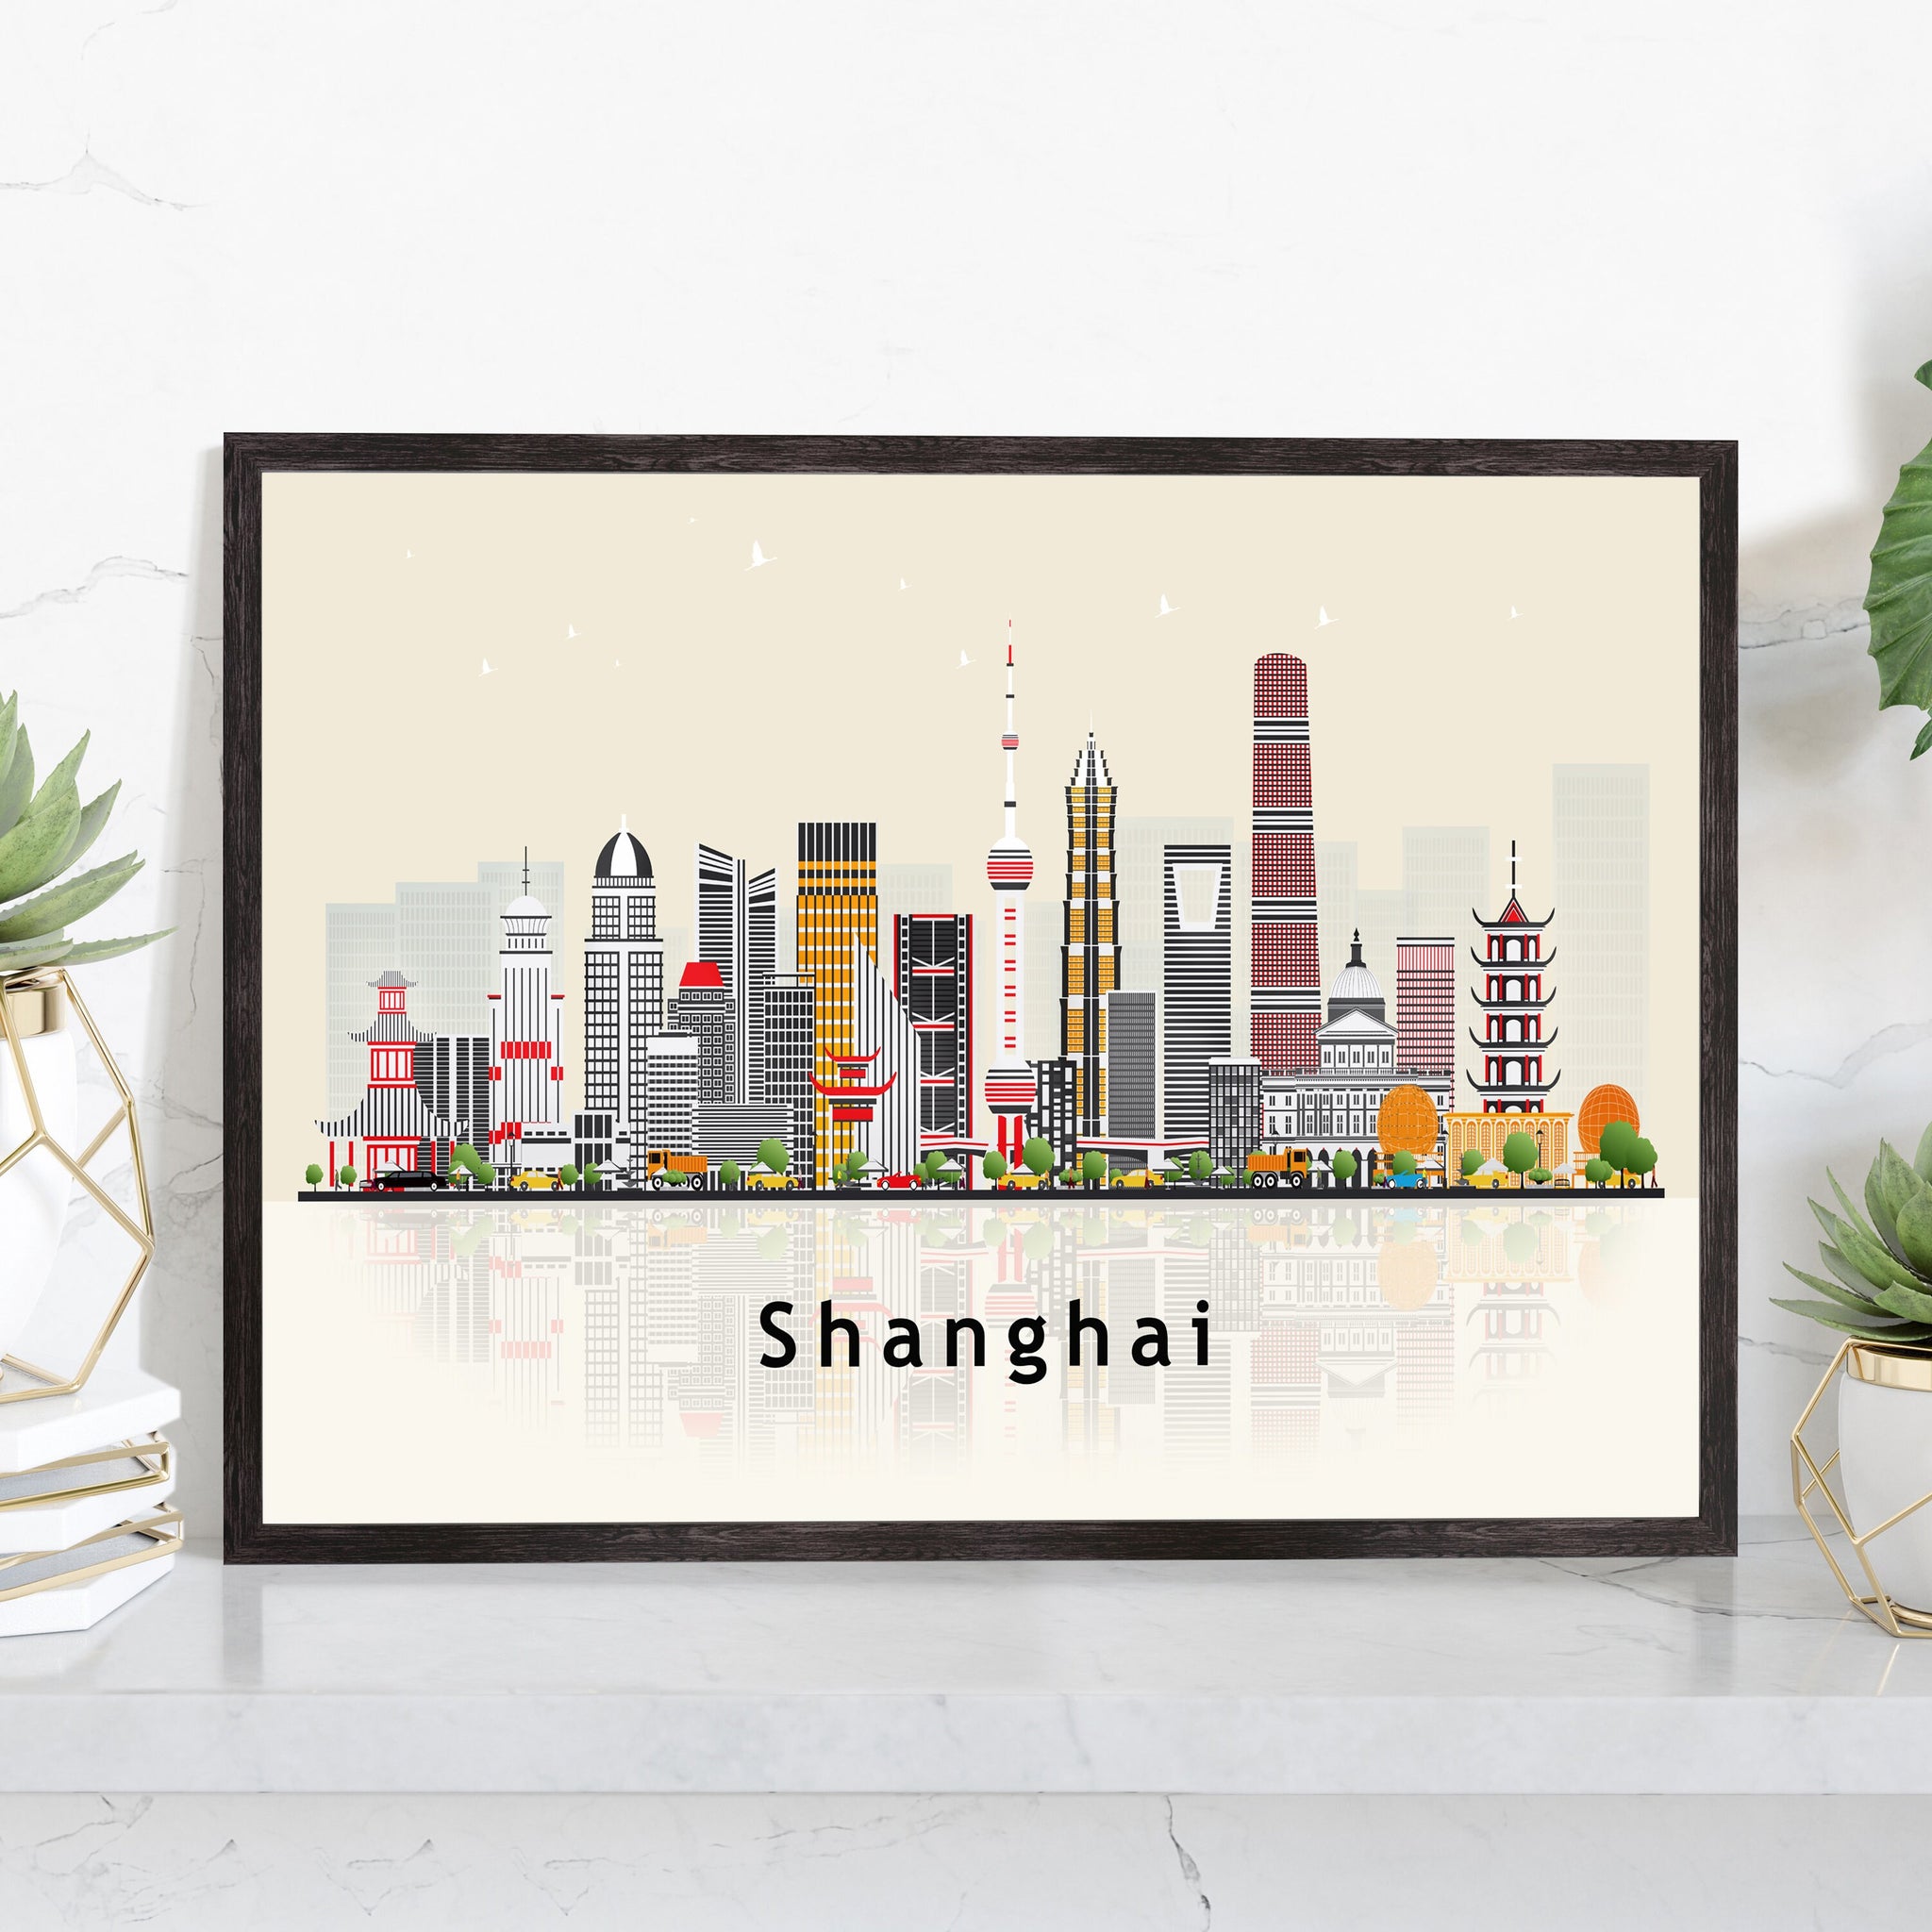 SHANGHAI CHINA Illustration skyline poster, Modern skyline cityscape poster, China city skyline landmark map poster, Home wall decoration